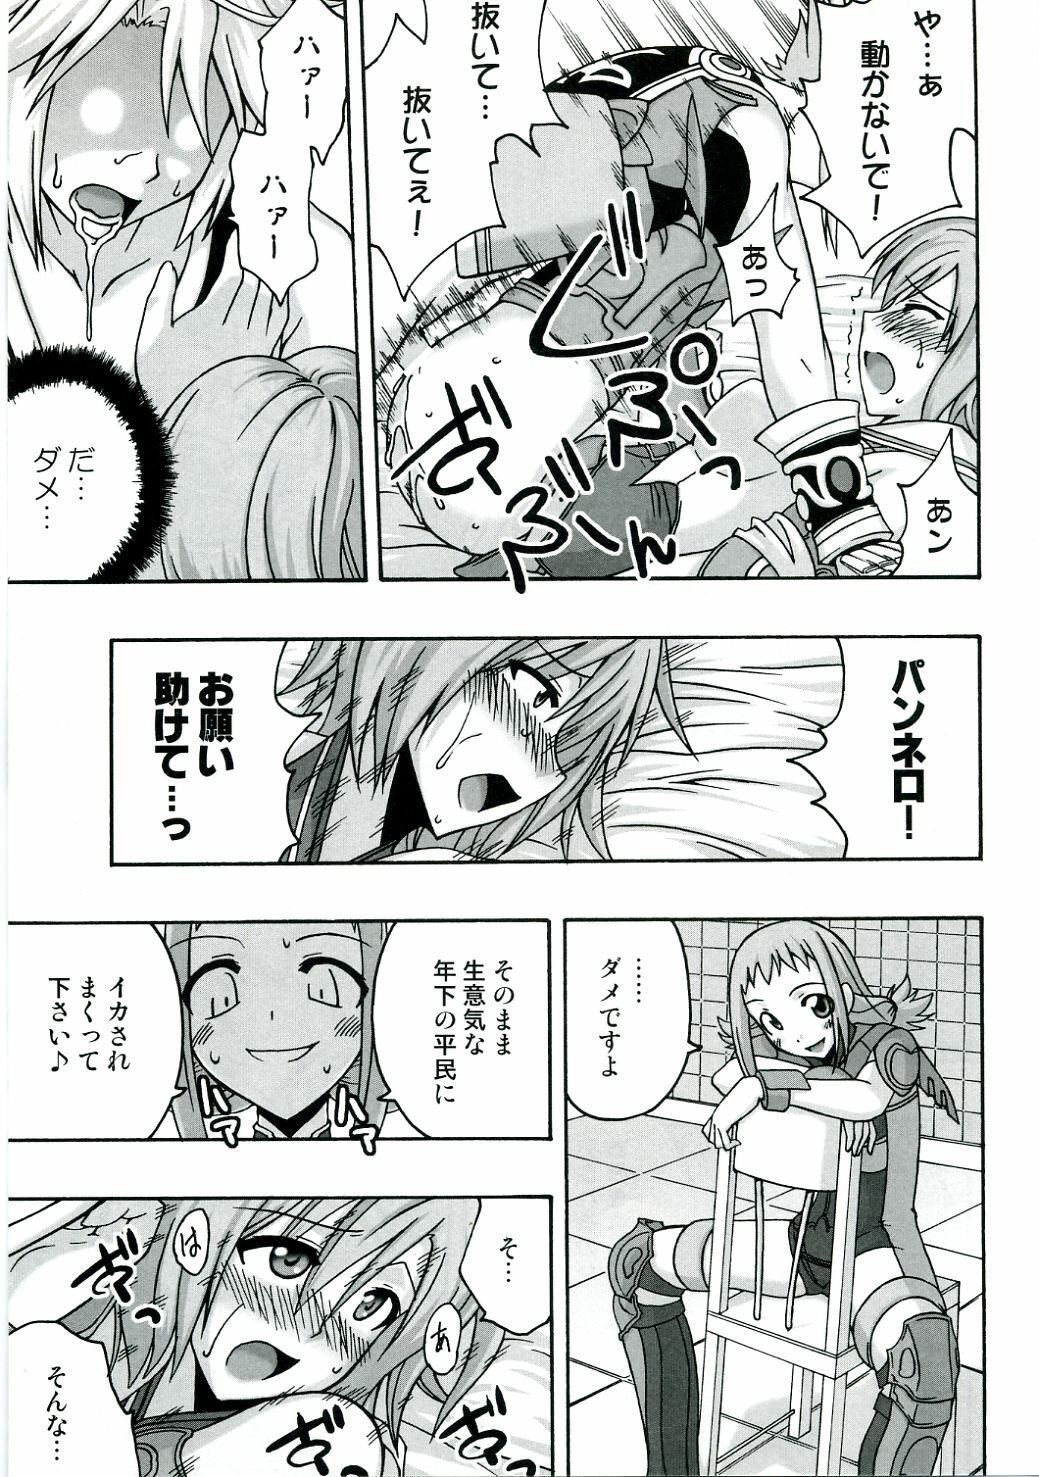 (C70) [FruitsJam (Mikagami Sou)] In The Room (Final Fantasy XII) page 20 full